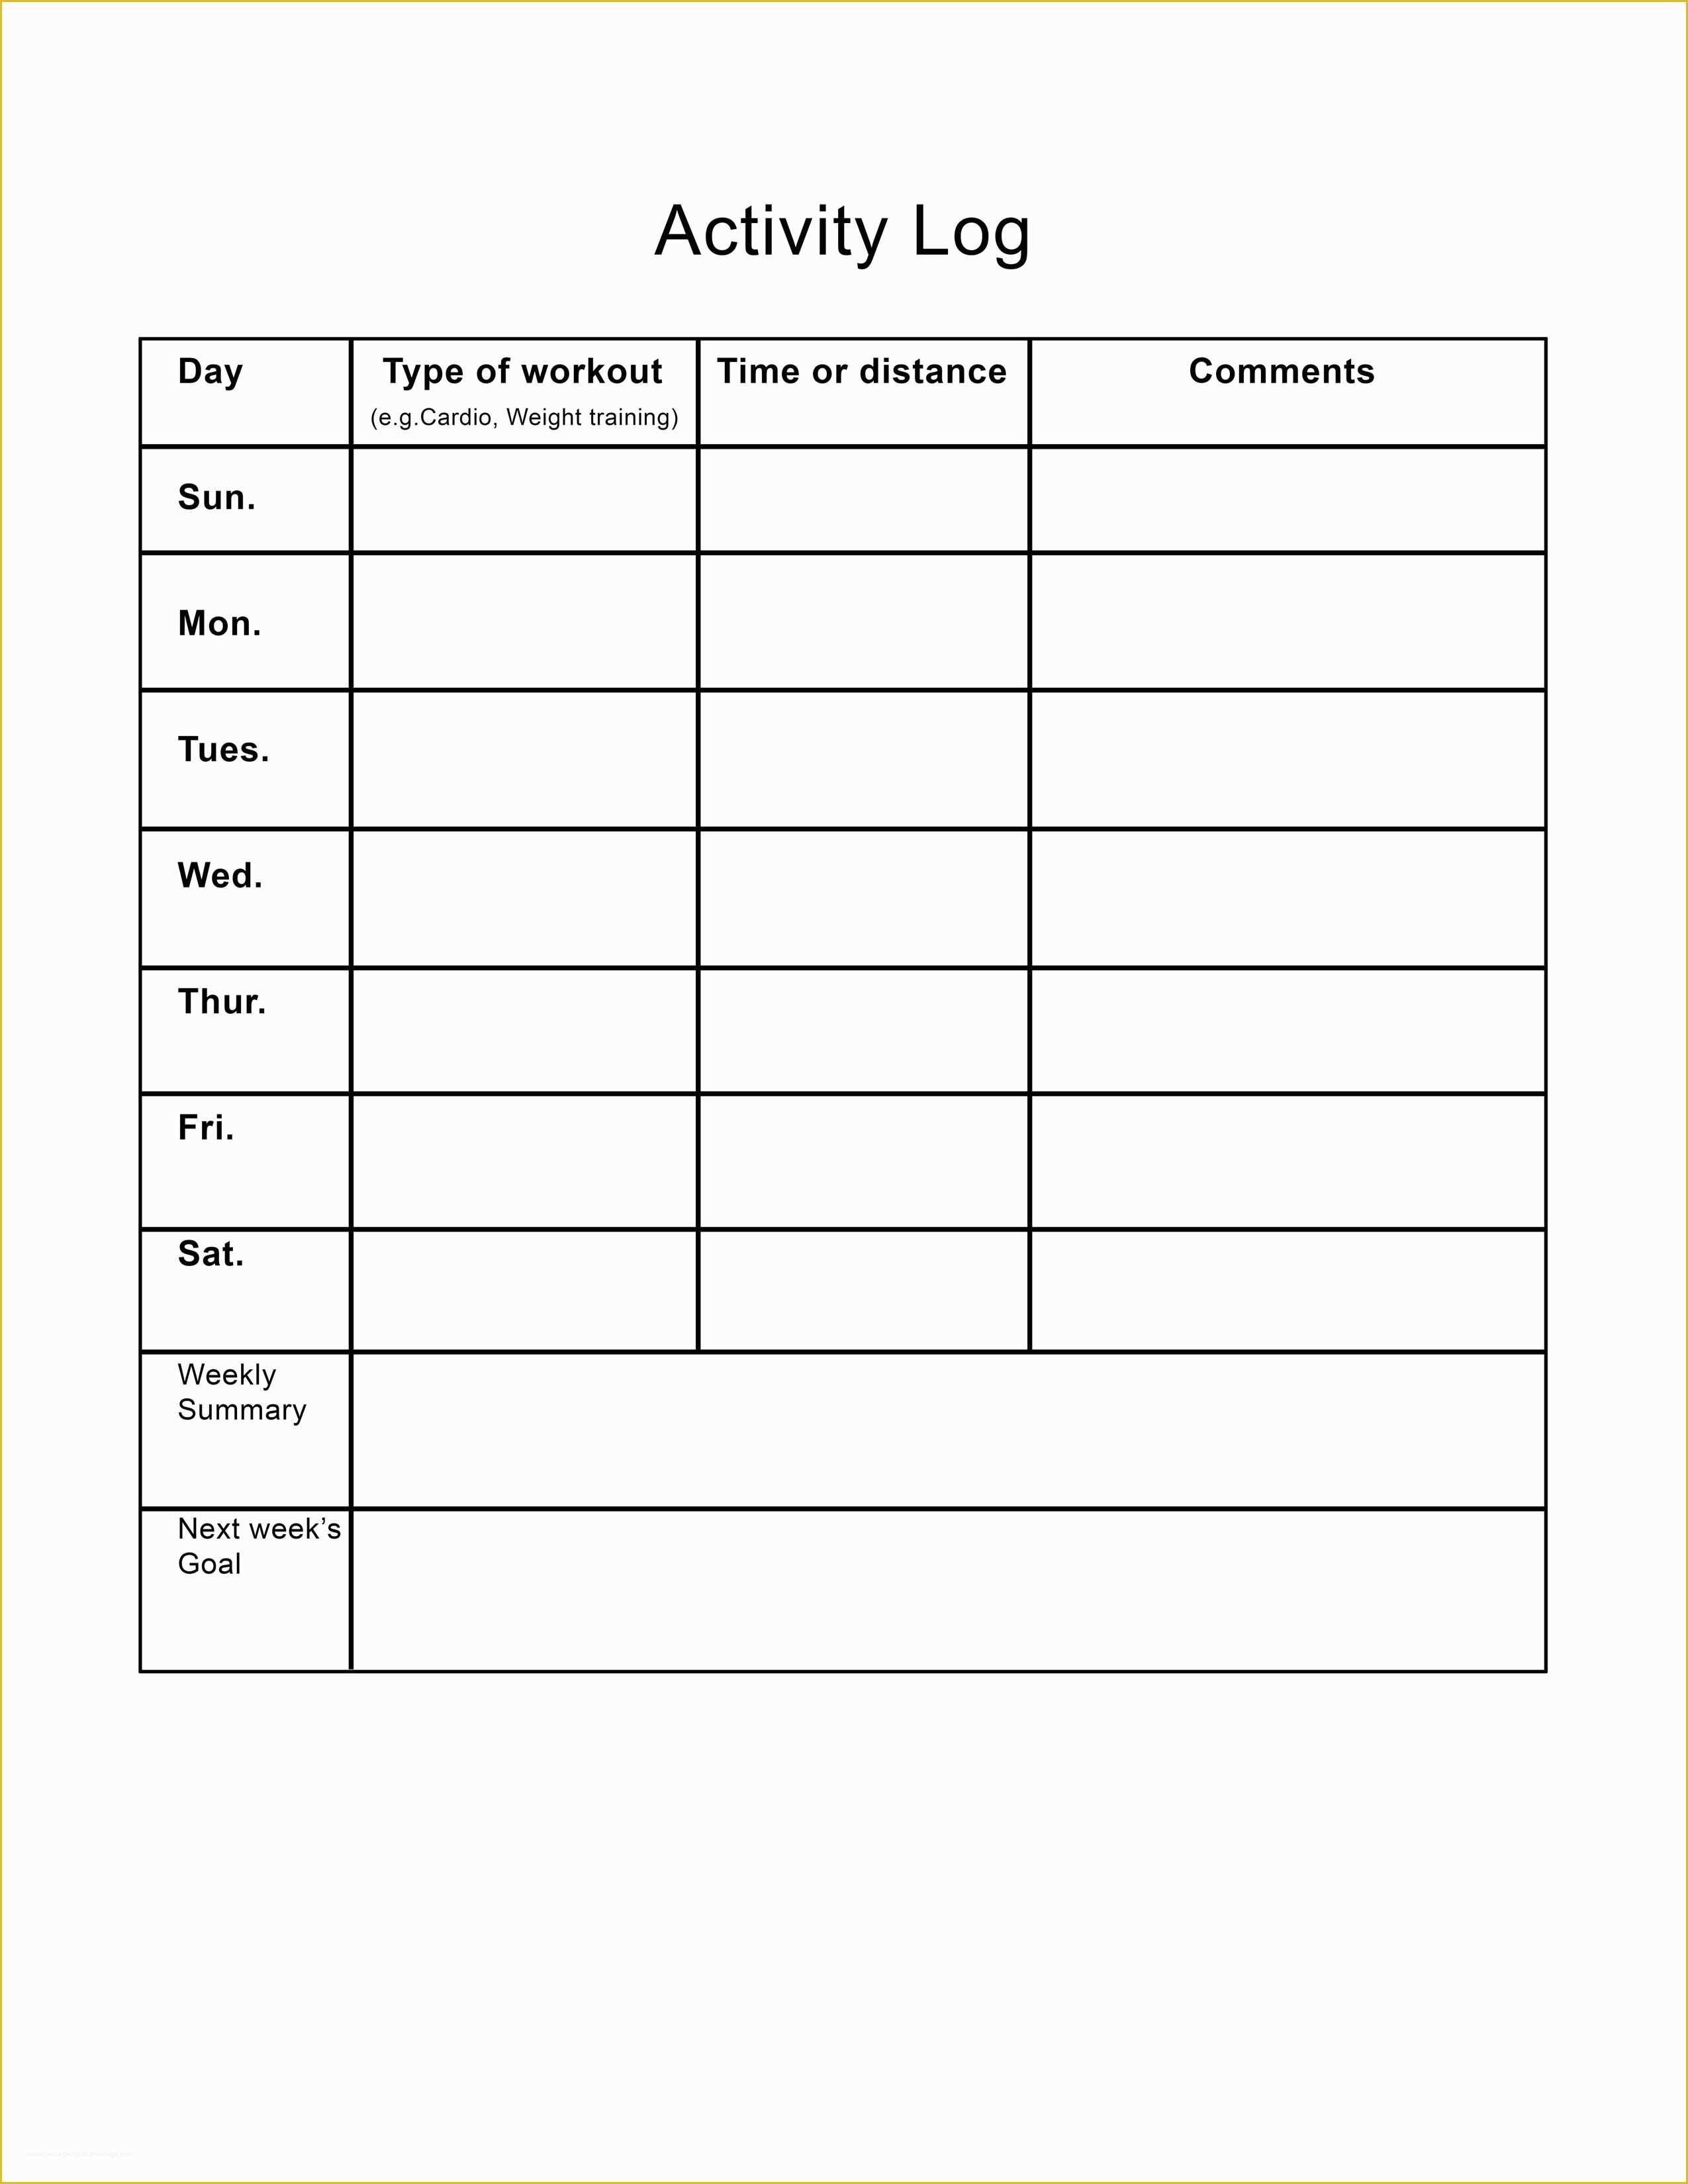 Daily Activity Log Template